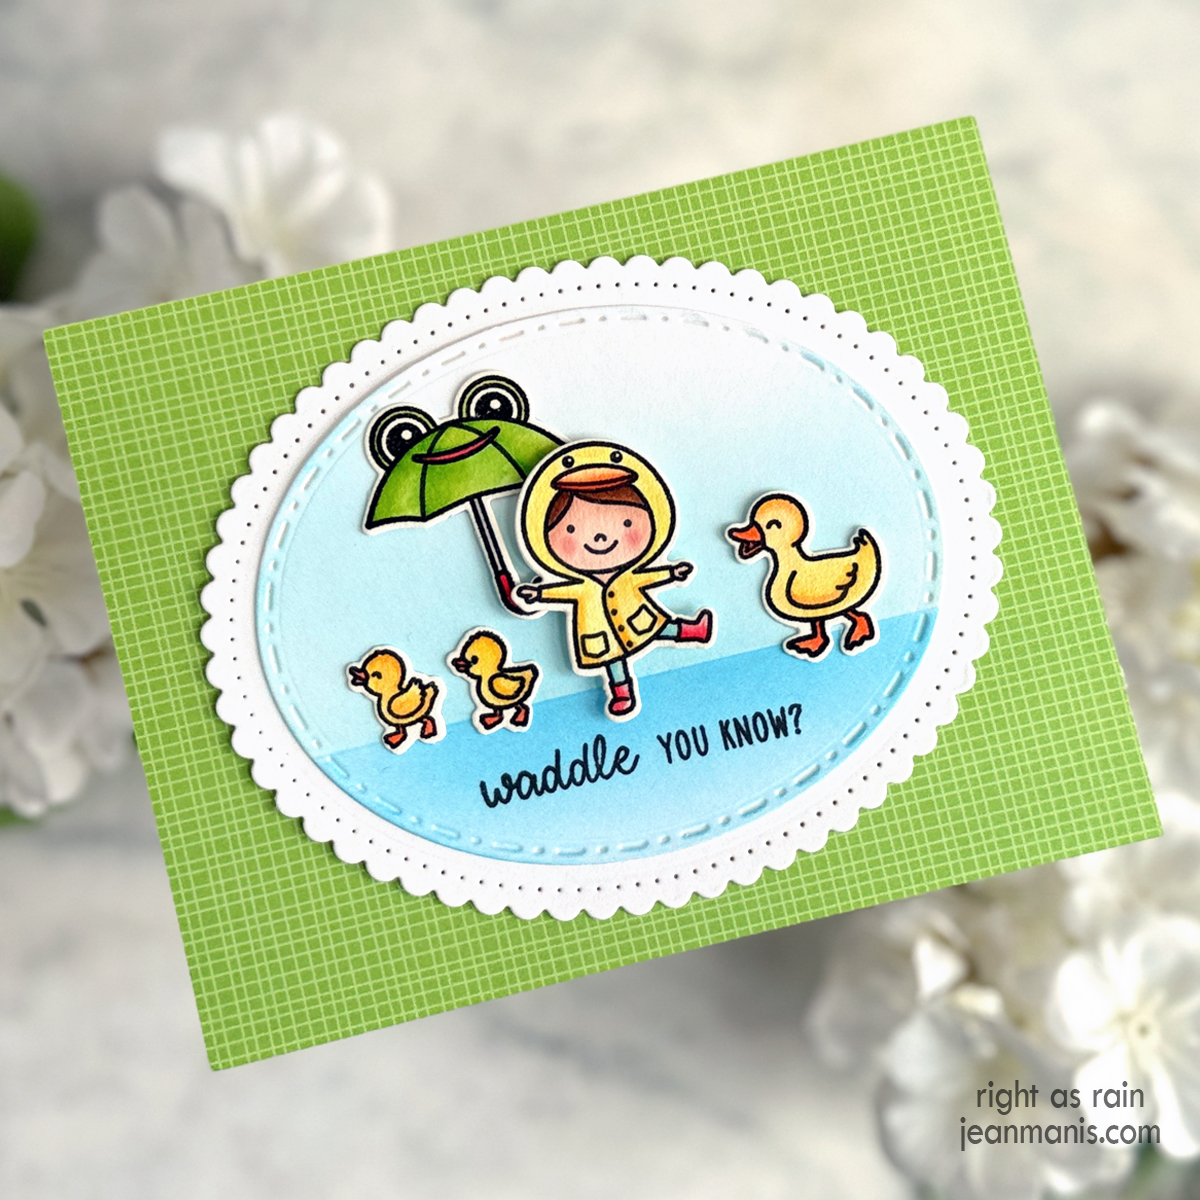 Waddle You Know? Friendship Card